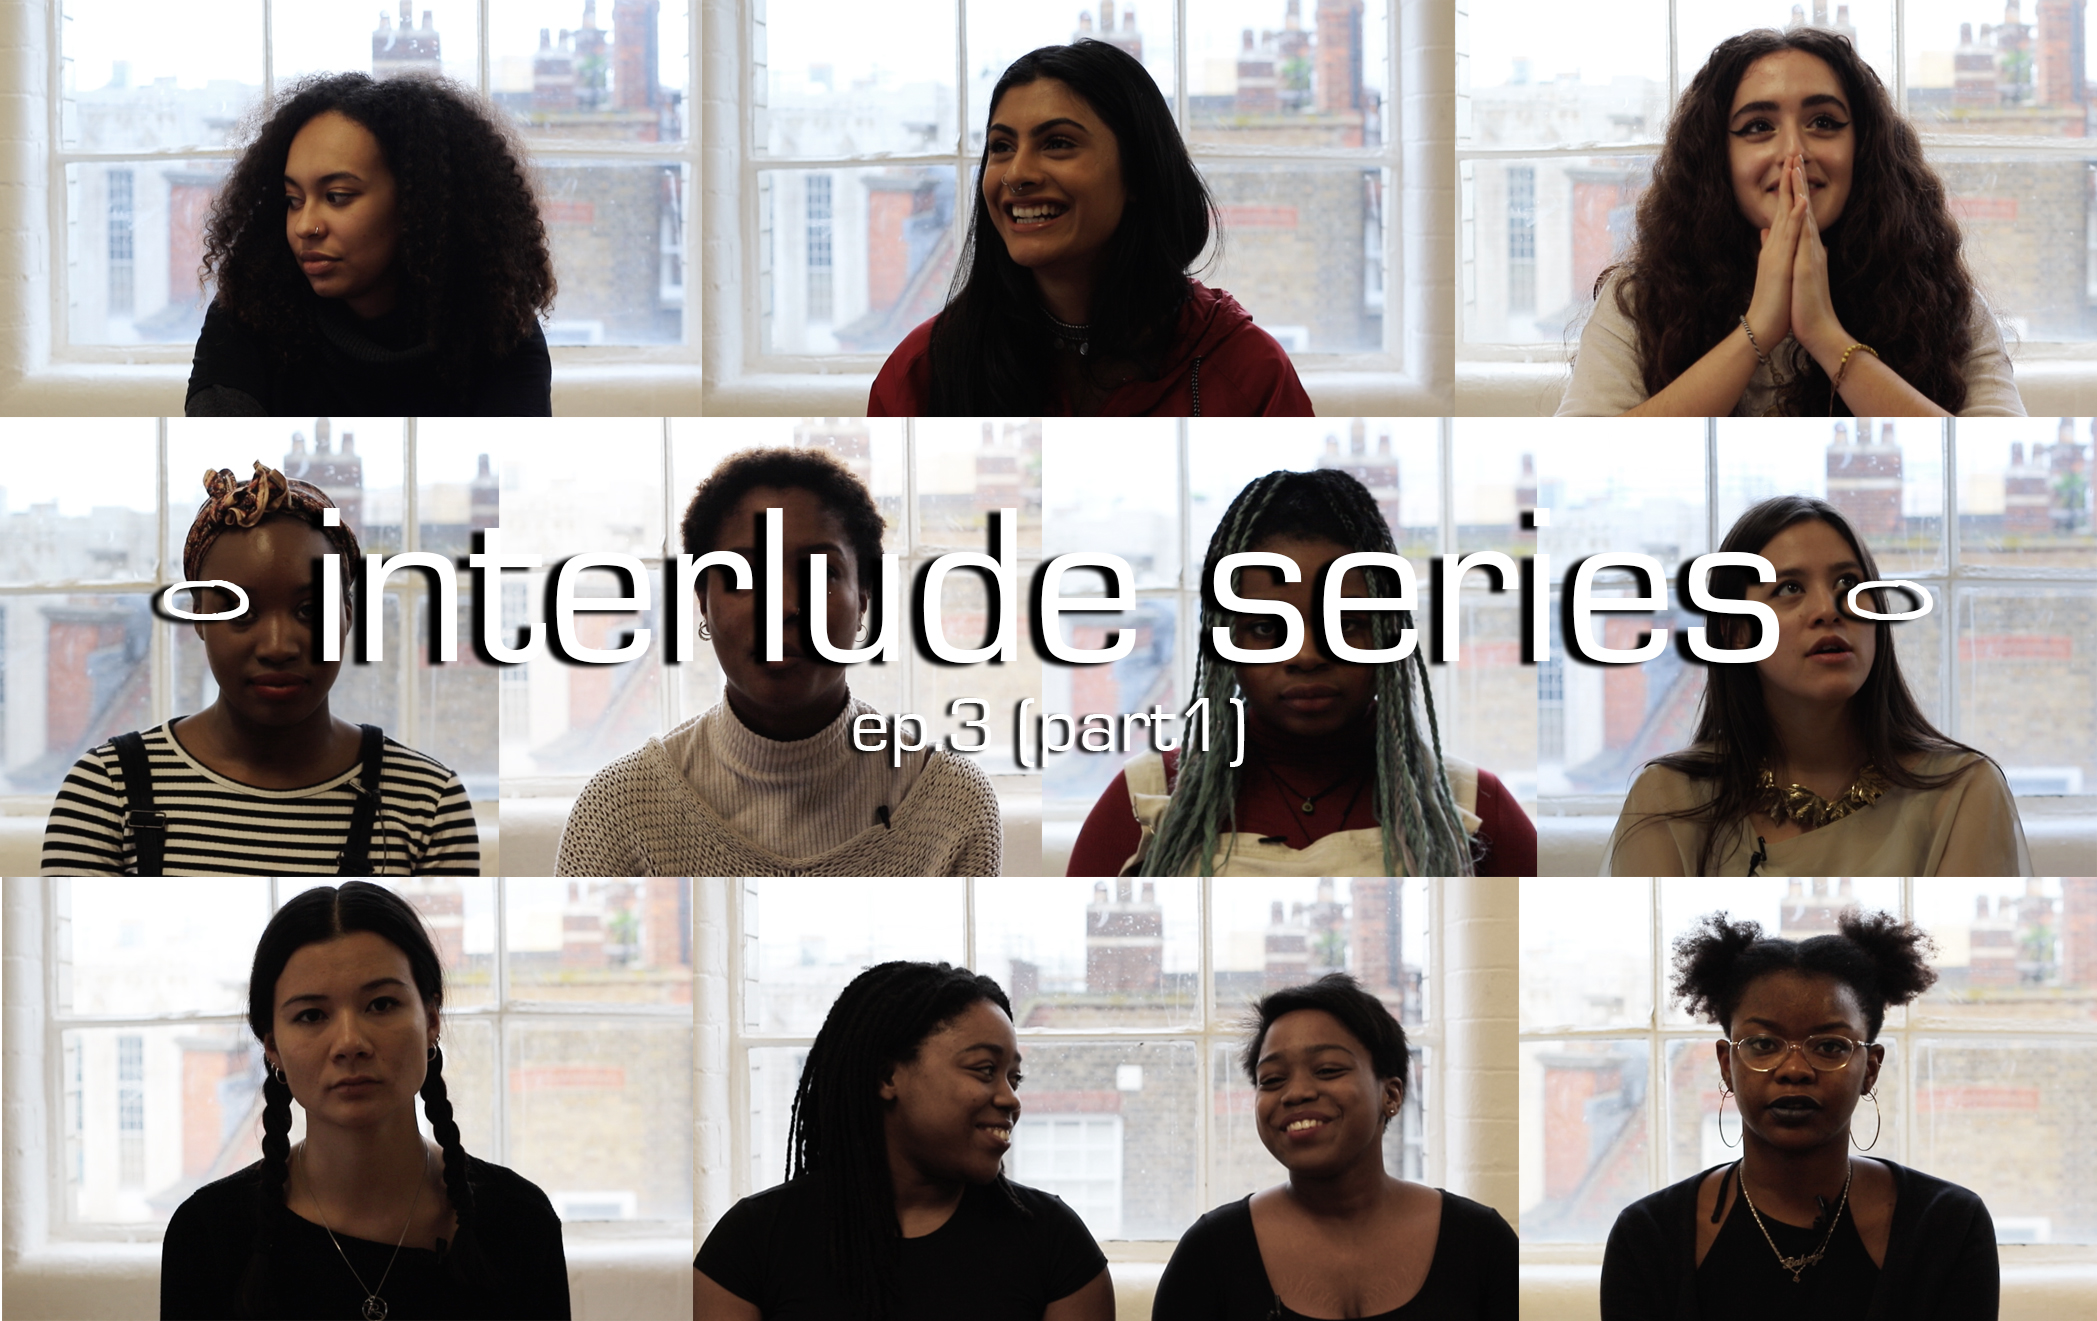 gal-dem interlude series episode 3 (part 1): where are you from?